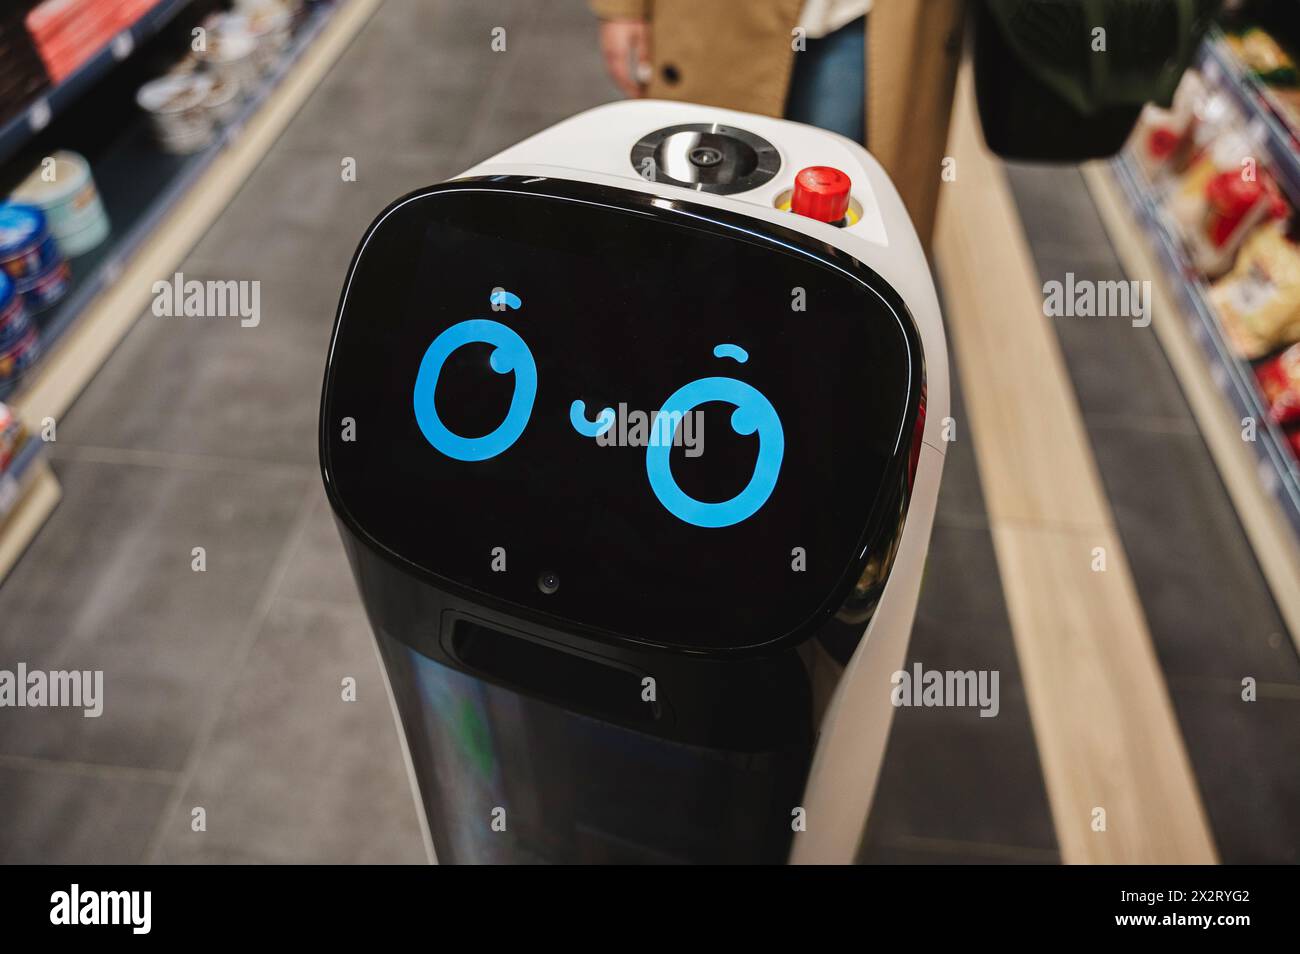 Cute robot with artificial intelligence at supermarket Stock Photo